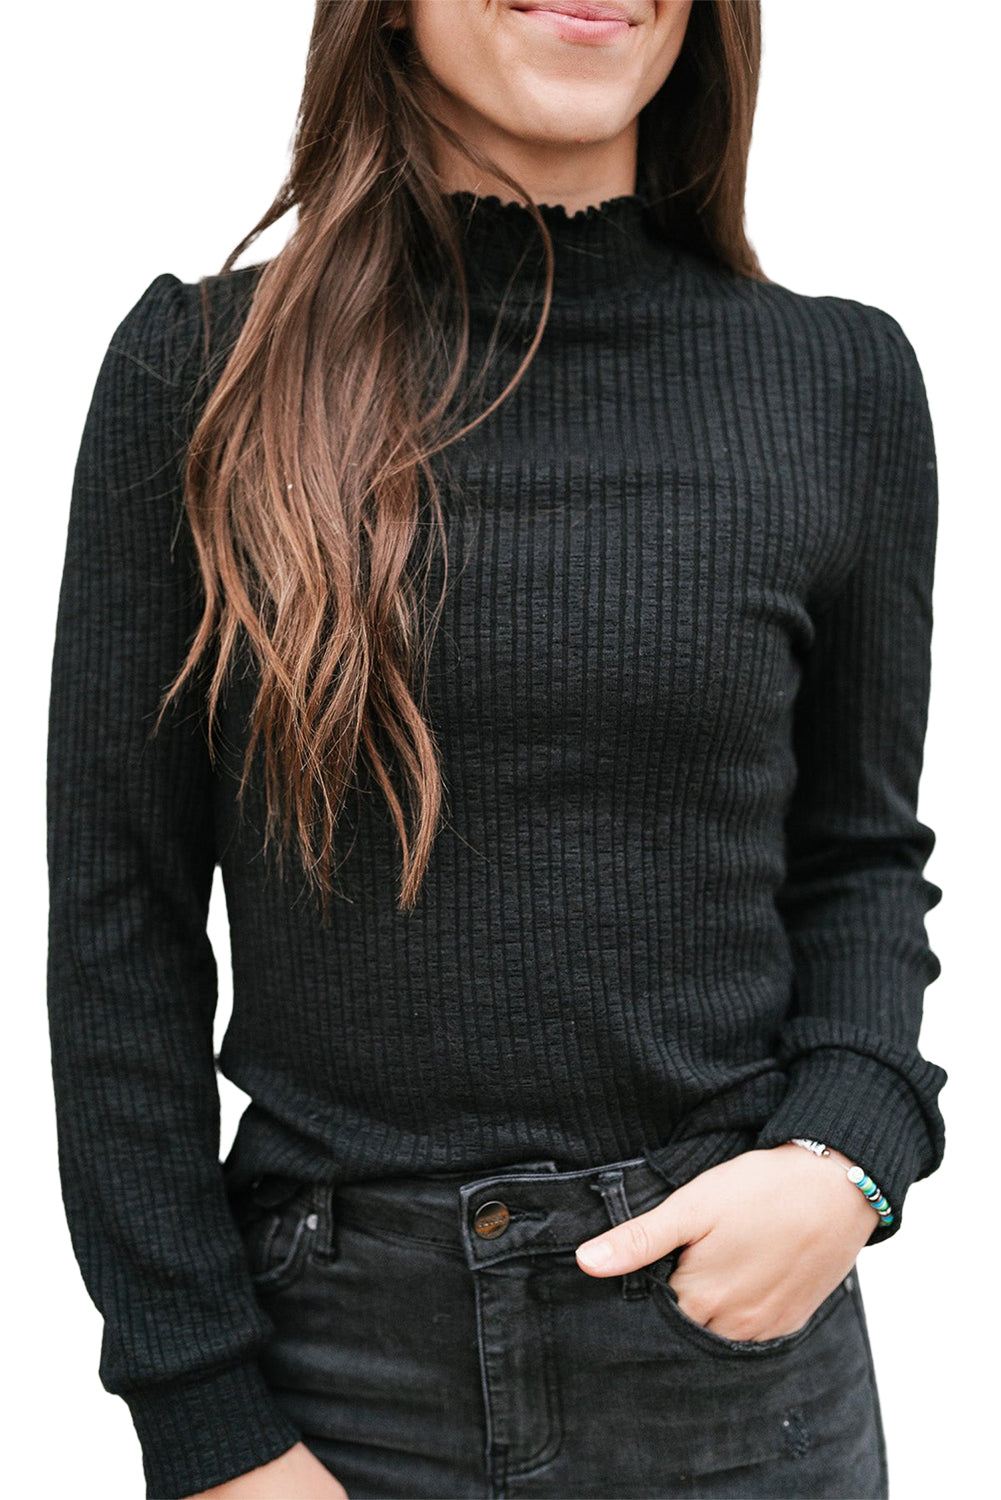 Black Solid Color Ruffled High Neck Long Sleeve Top